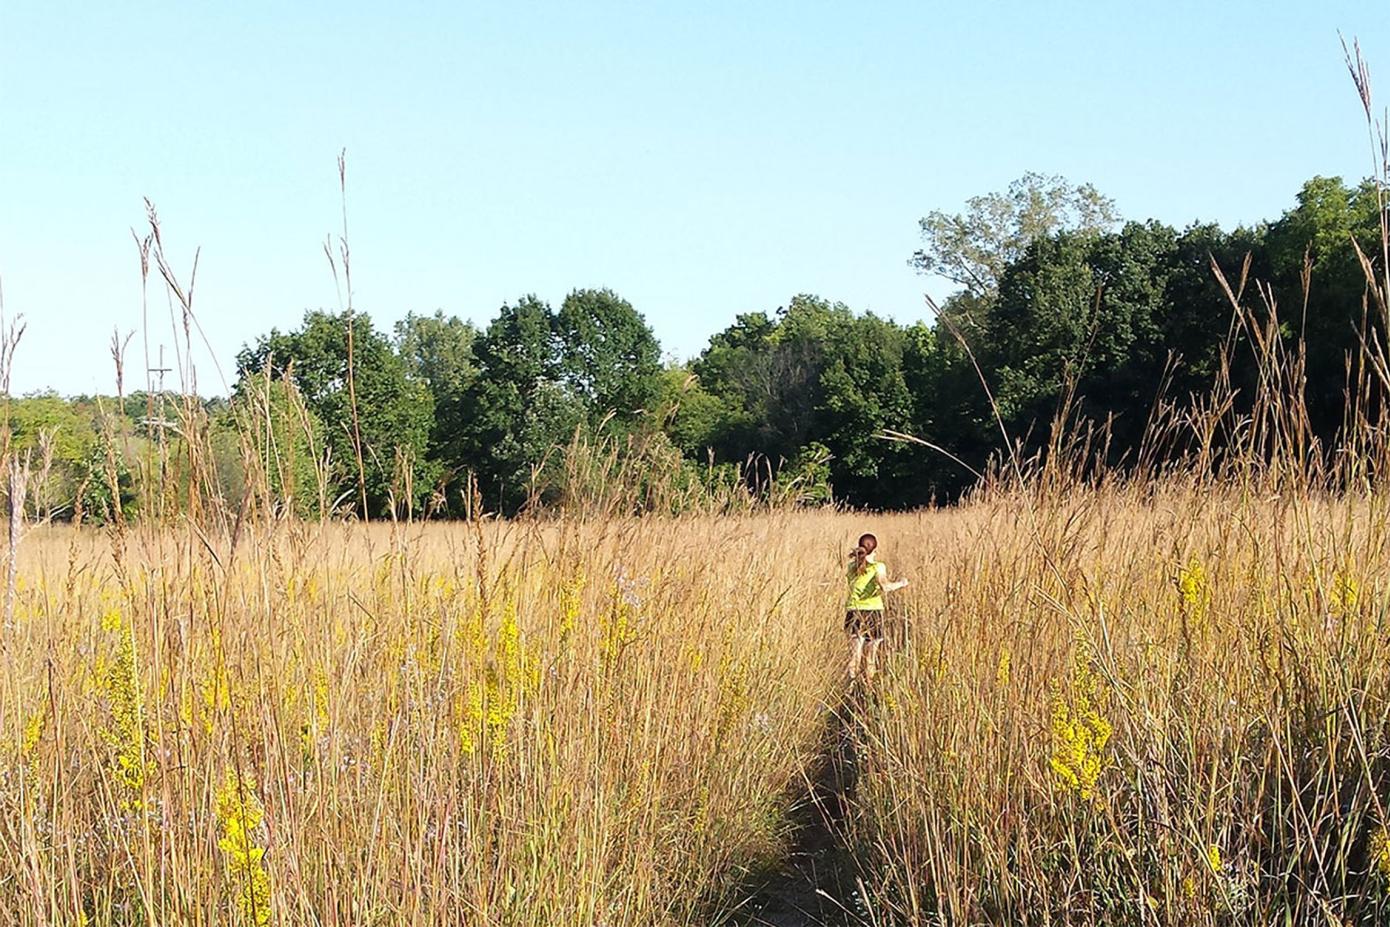 Person running along a trail through the field